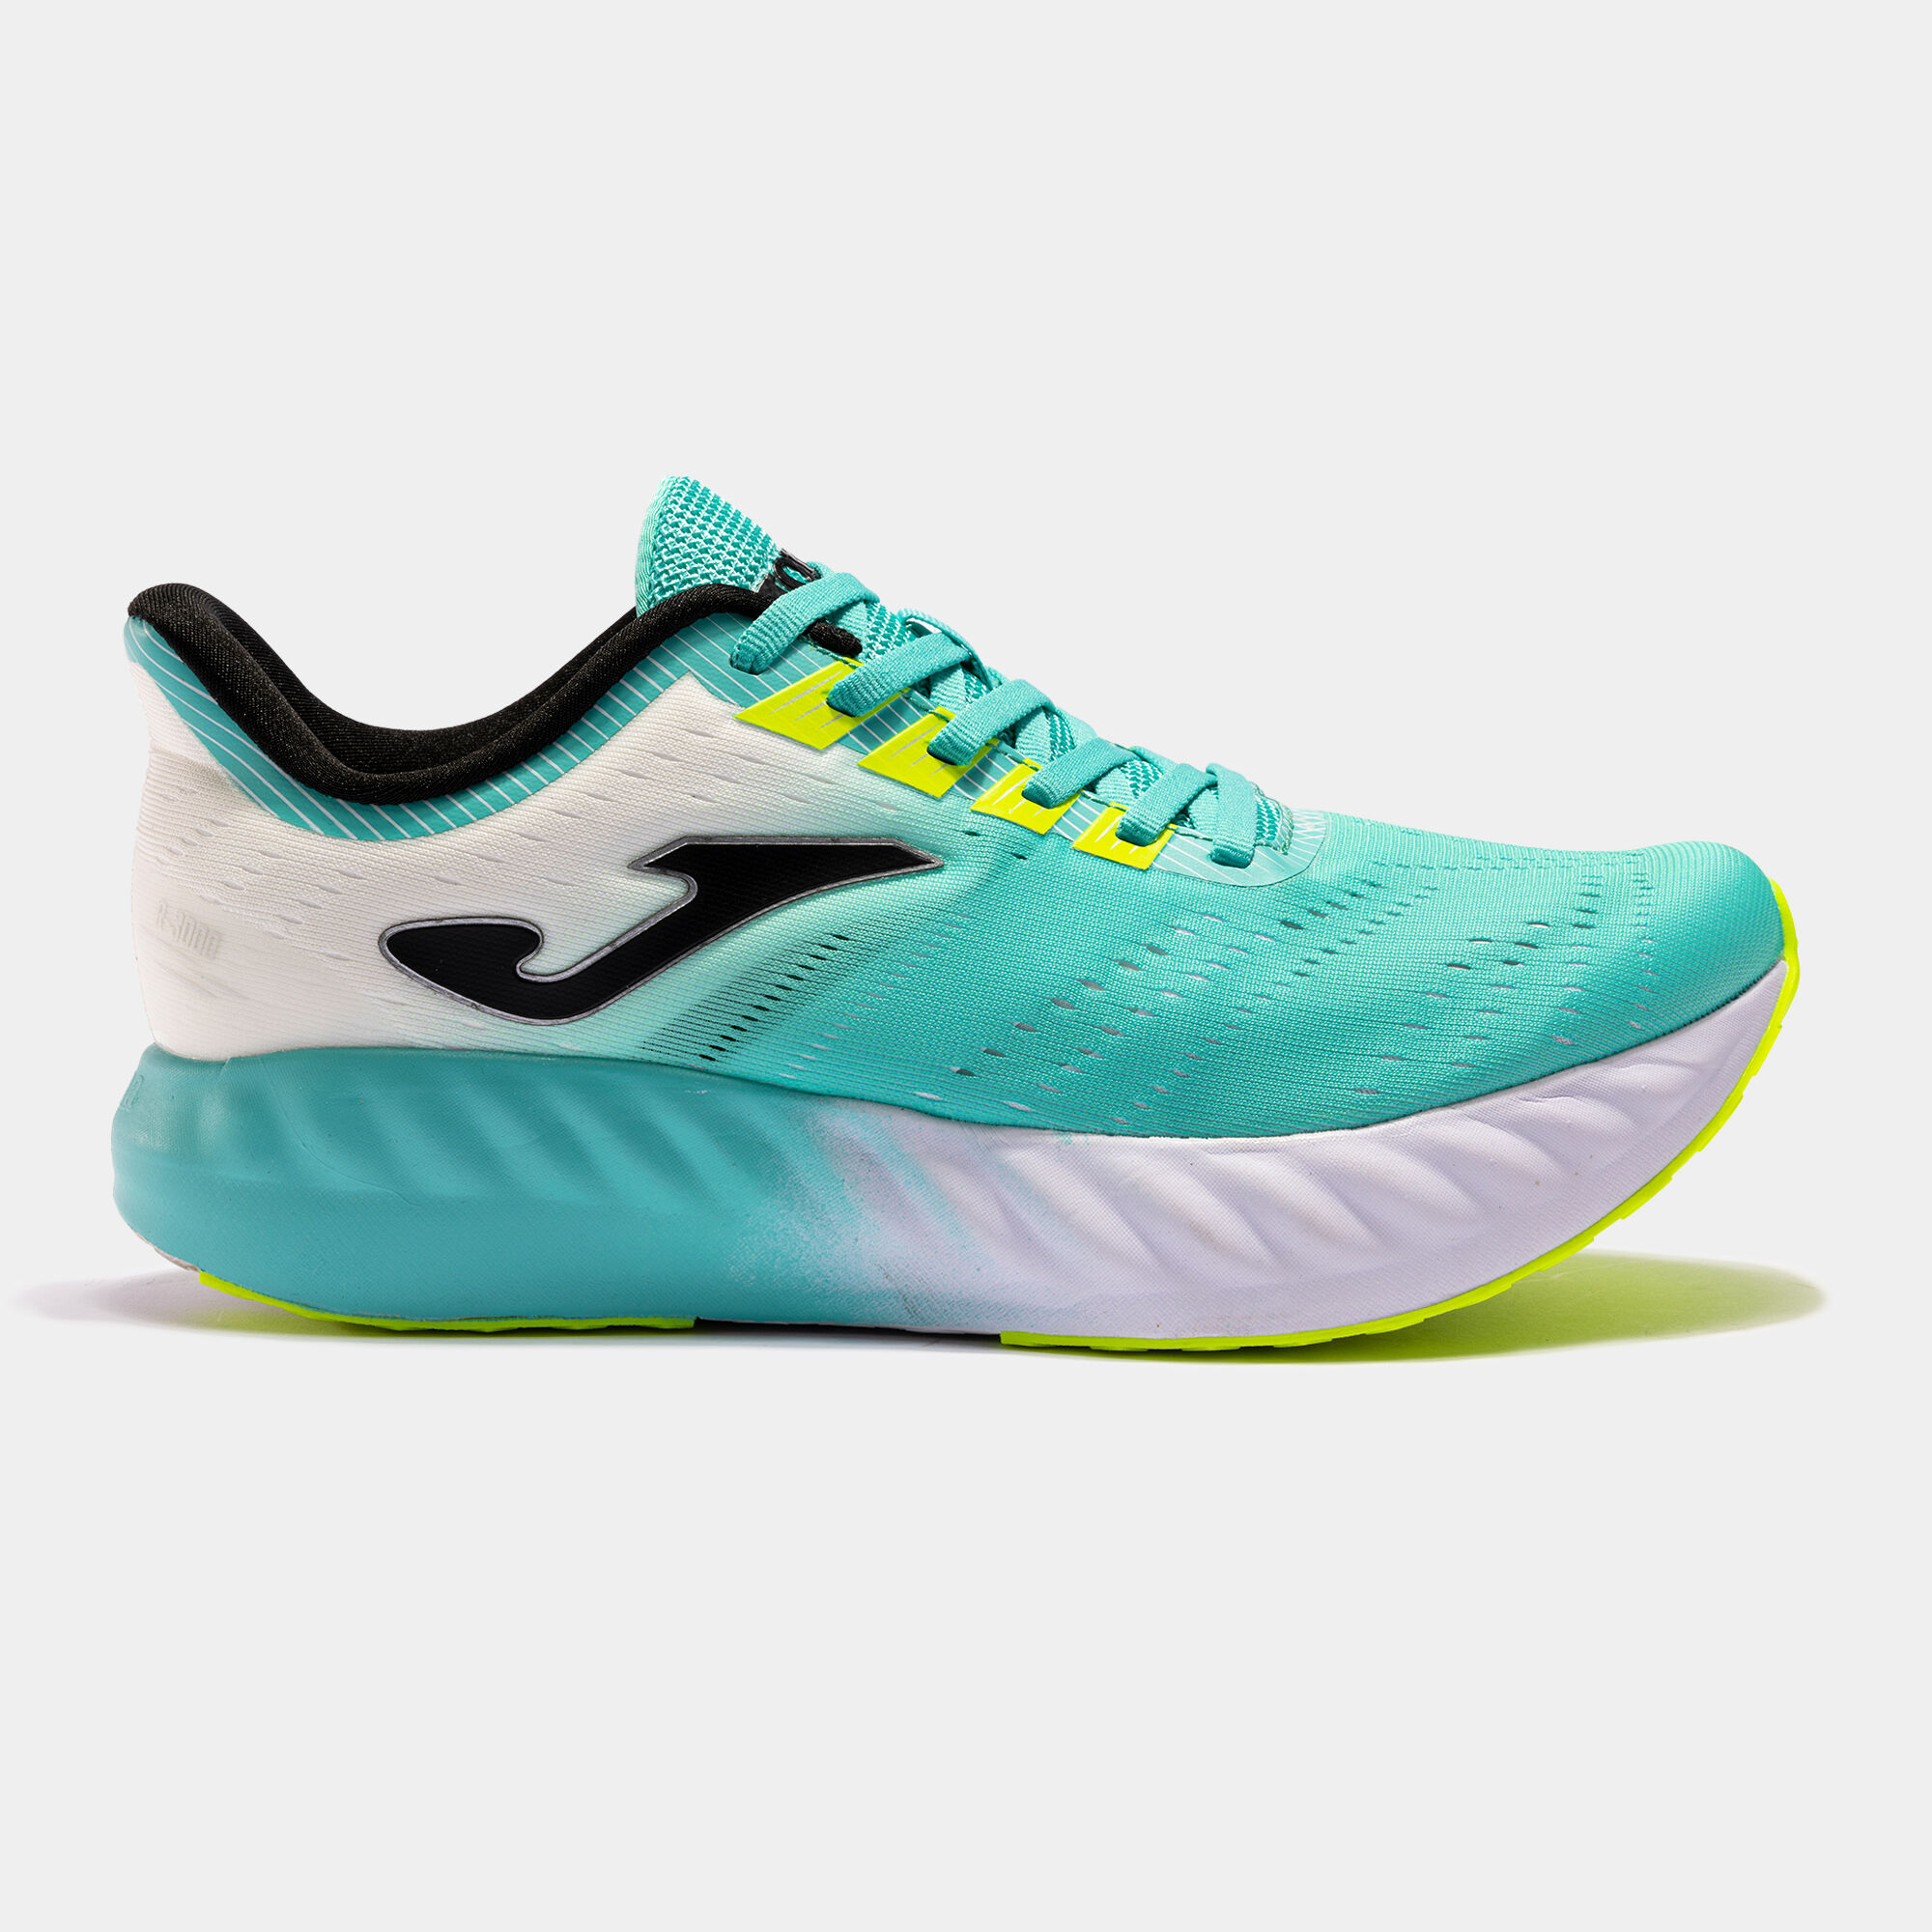 Running shoes R.3000 23 unisex turquoise